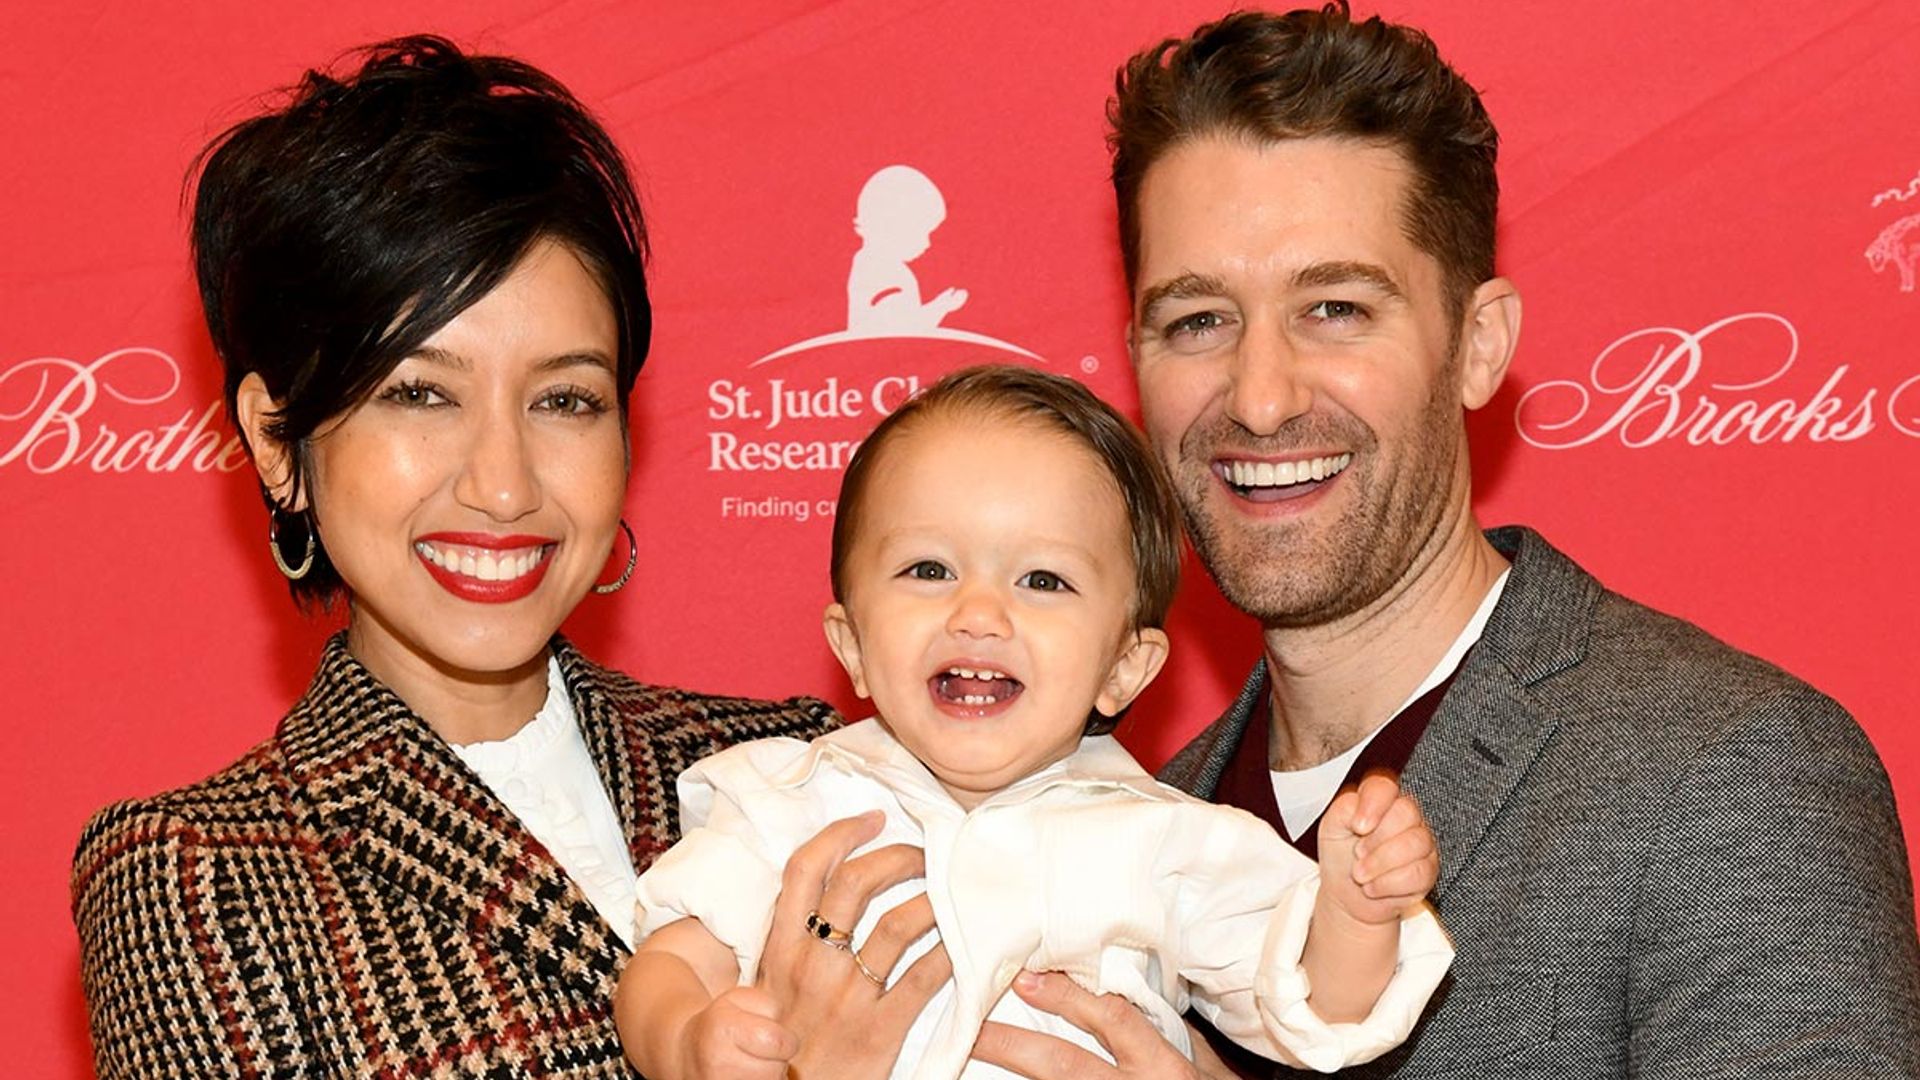 The Greatest Dancer star Matthew Morrison's special bond with his son